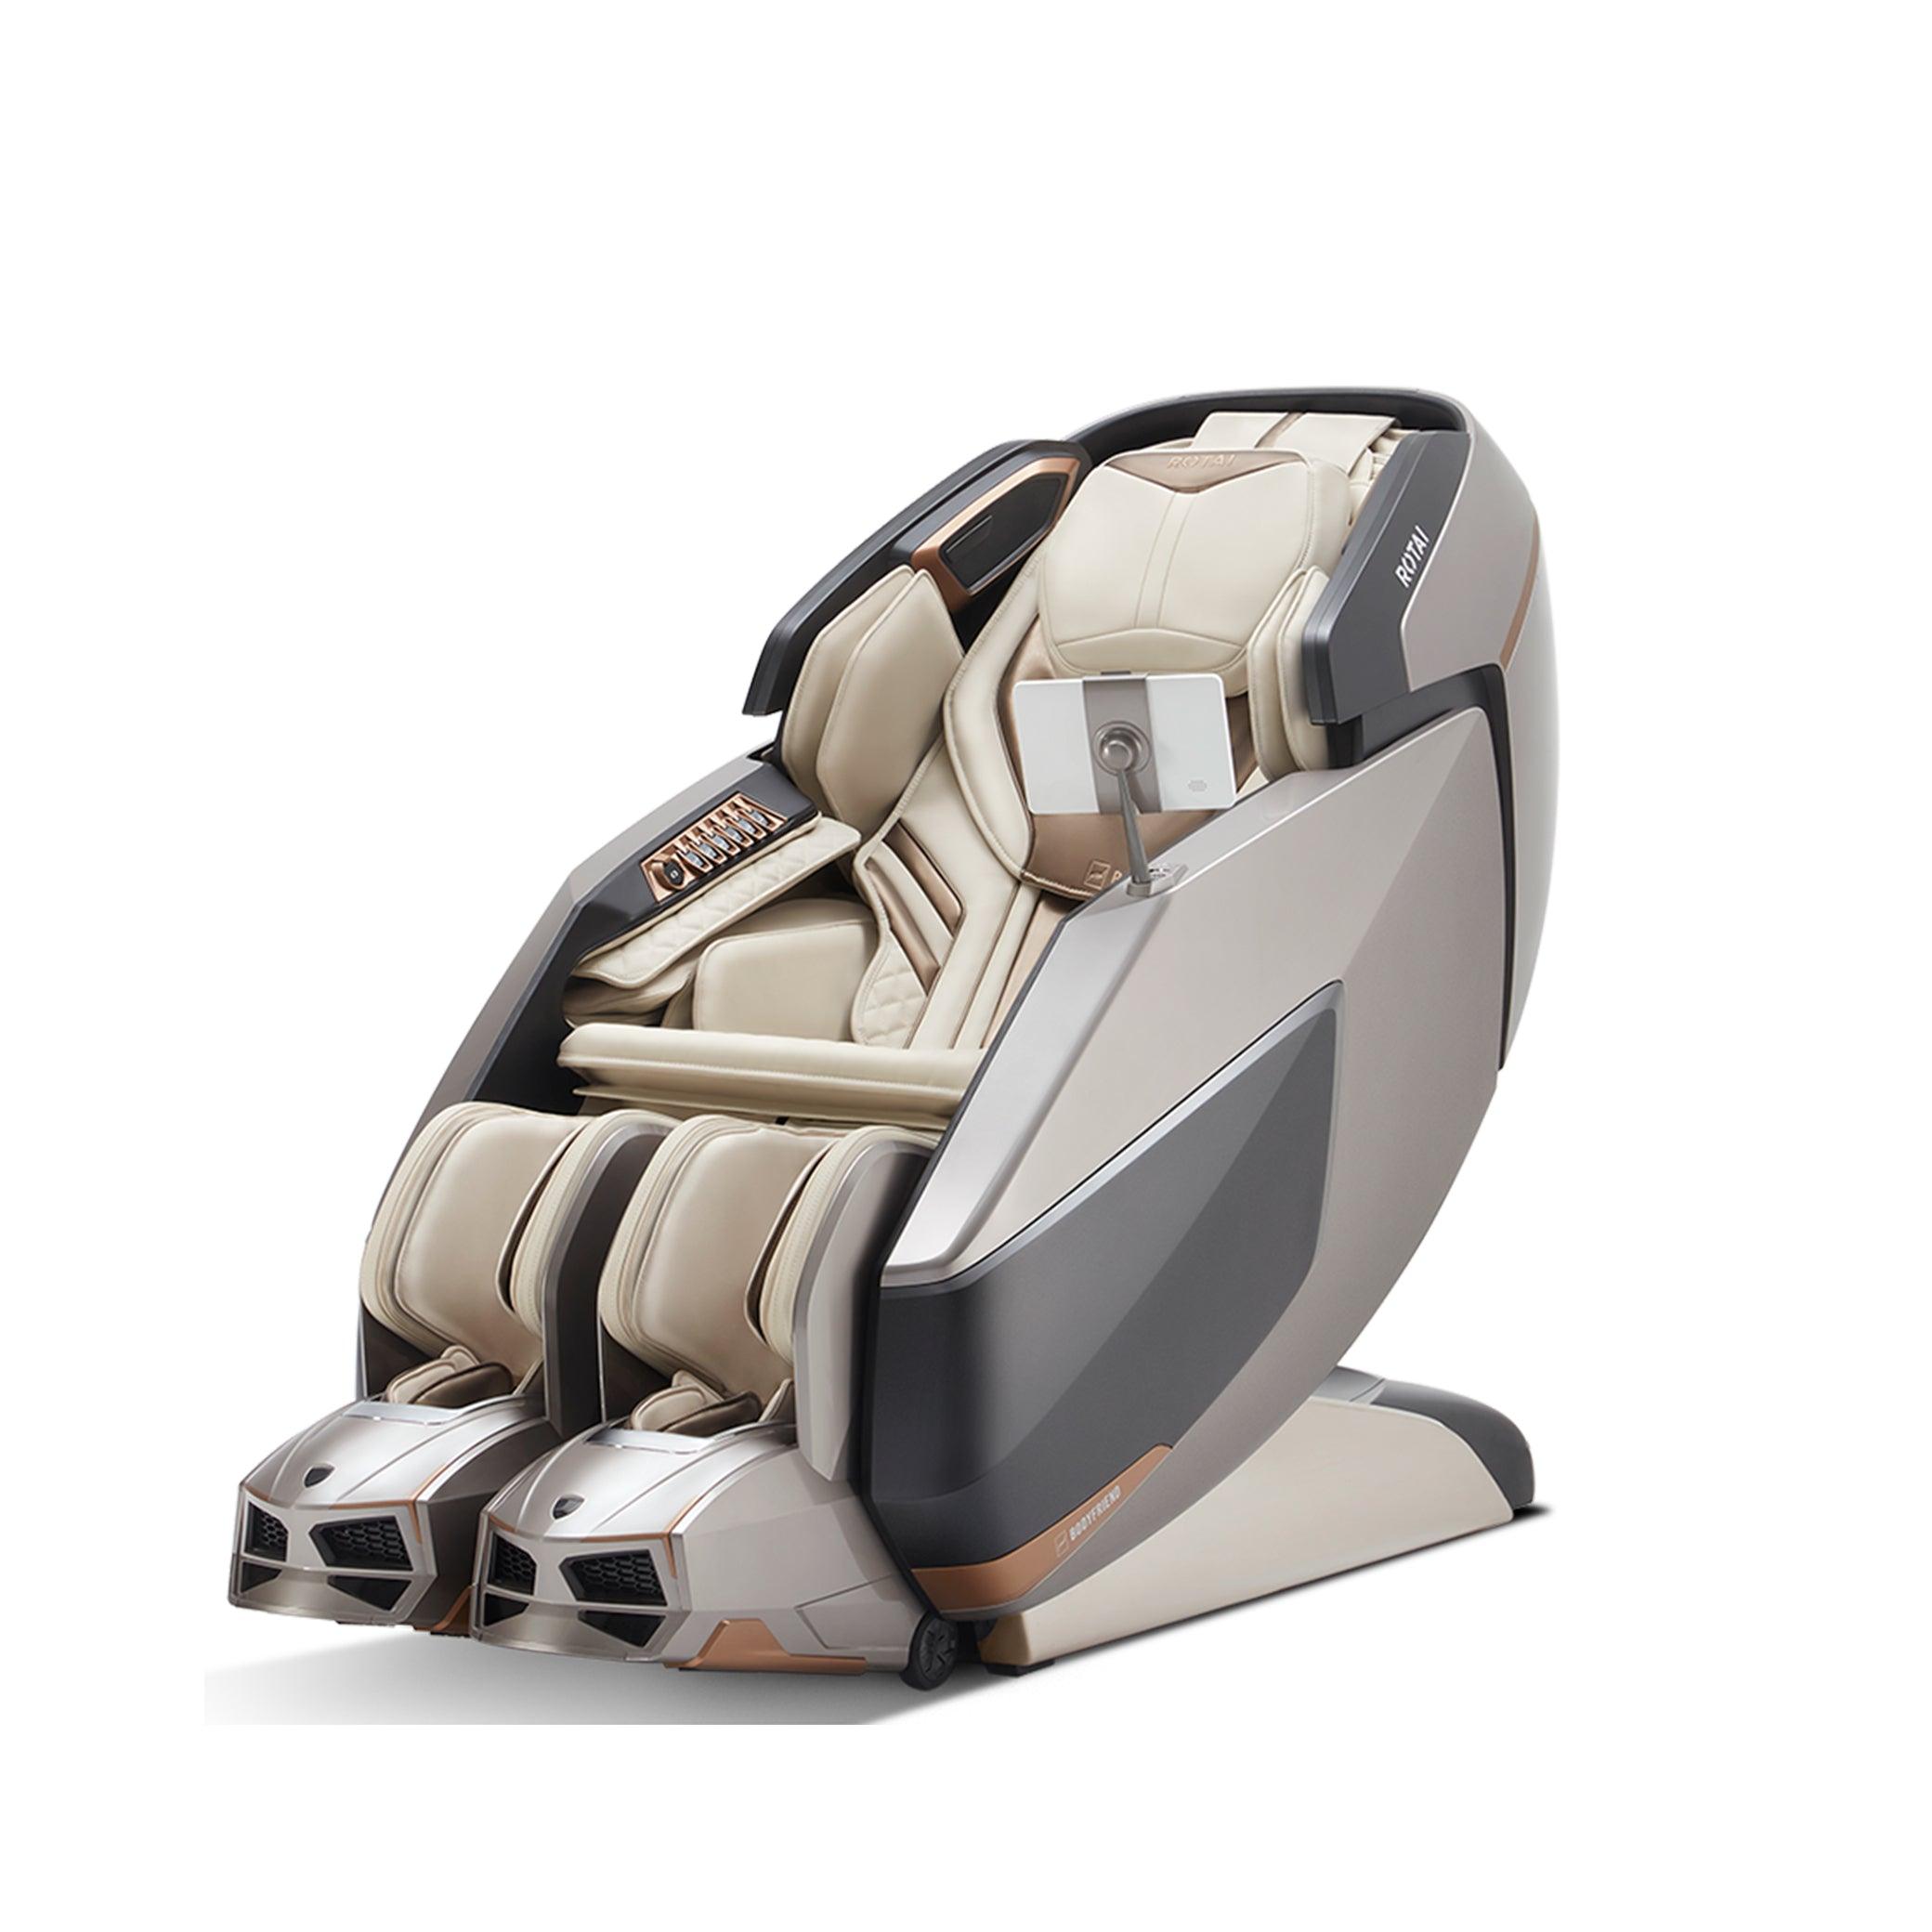 AI Robotic Massage Chair in Glacier Silver with Rovo-Walking Technology for best massage experience in UAE, Dubai, from massage chair shop.